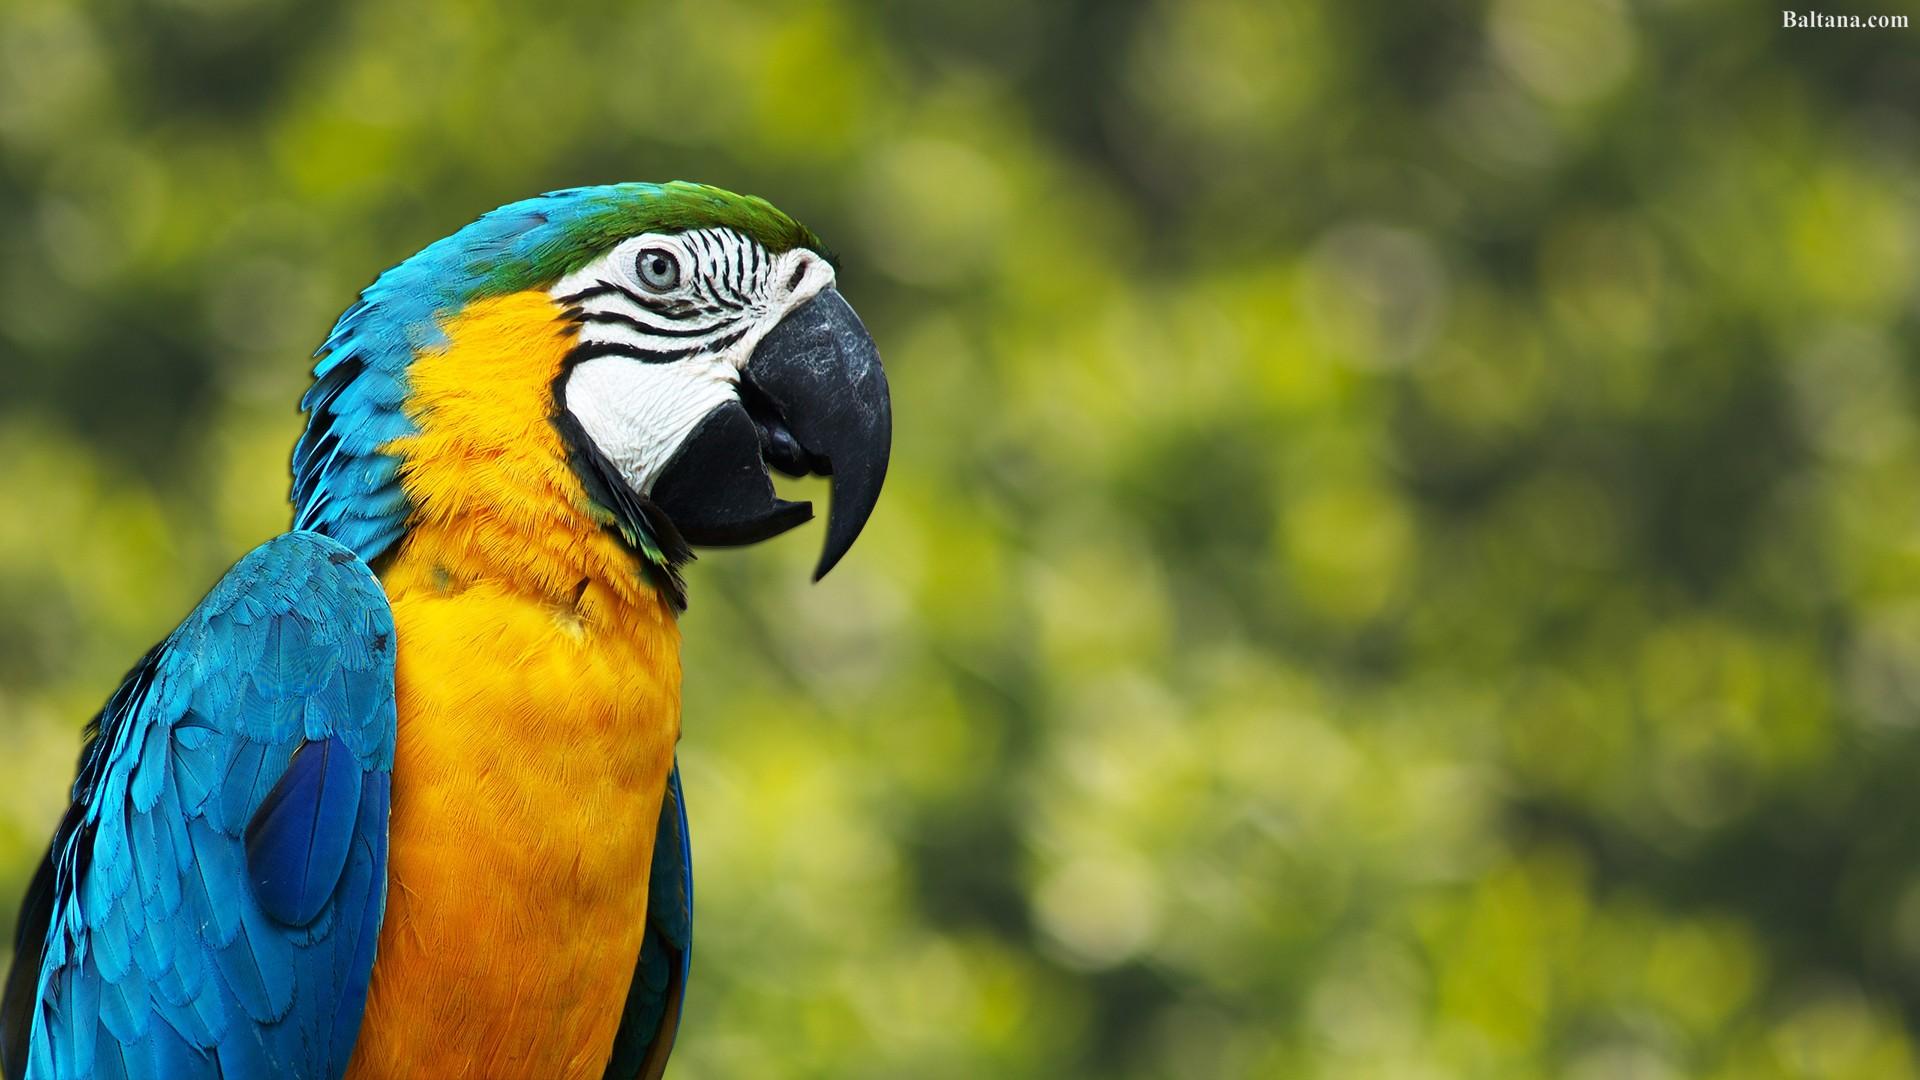 Parrot Wallpaper HD Background, Image, Pics, Photo Free Download